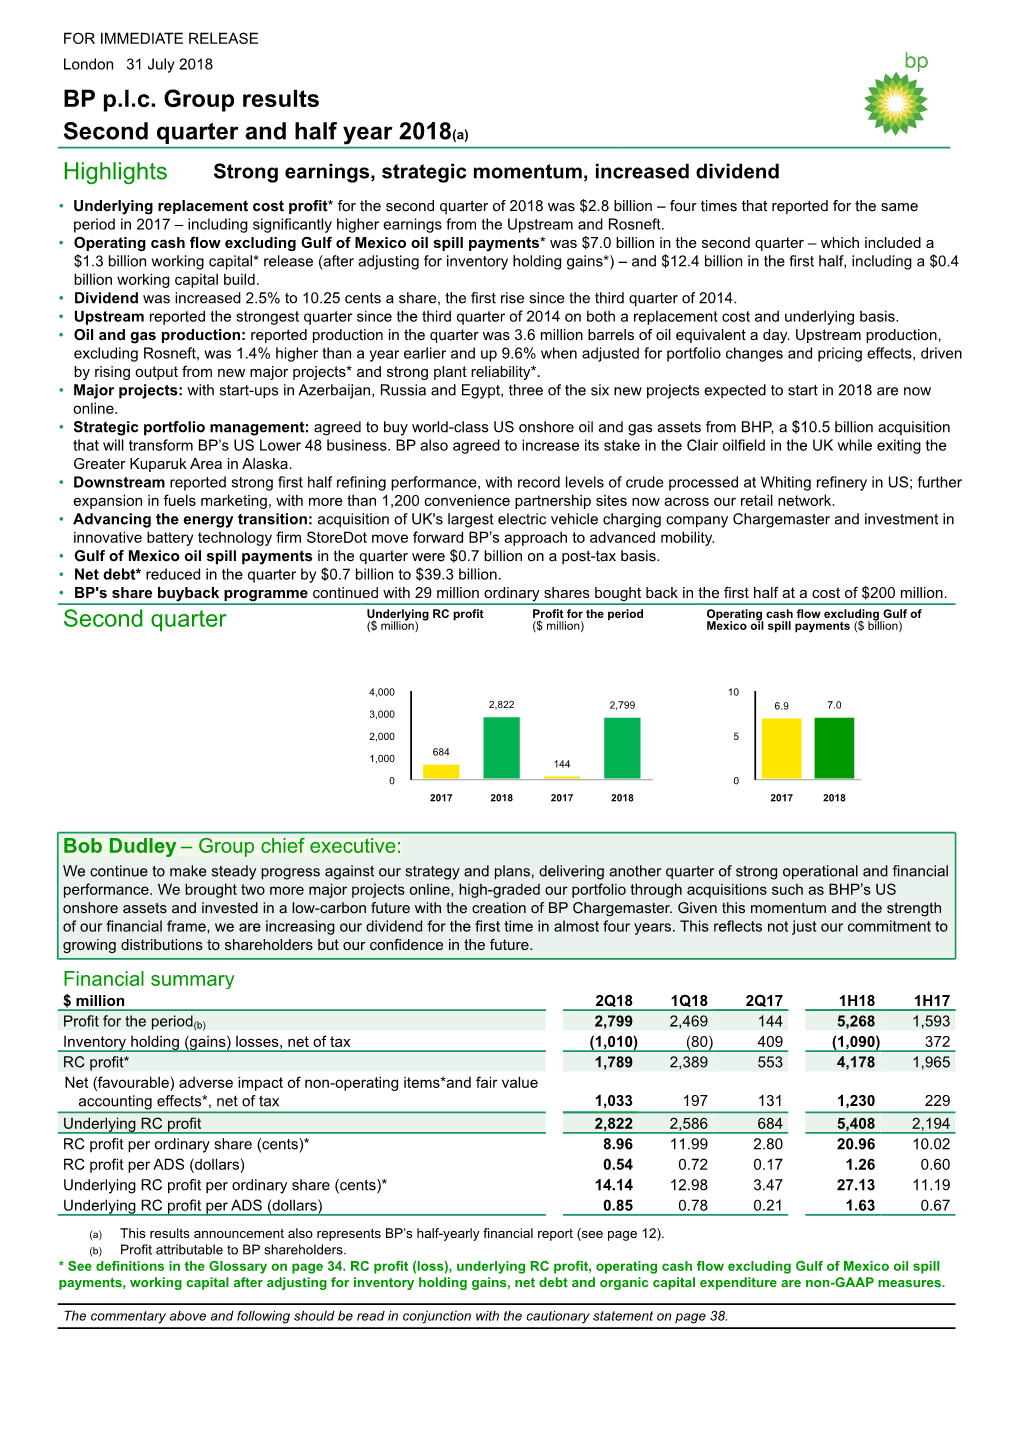 BP P.L.C. Group Results Second Quarter and Half Year 2018(A) Highlights